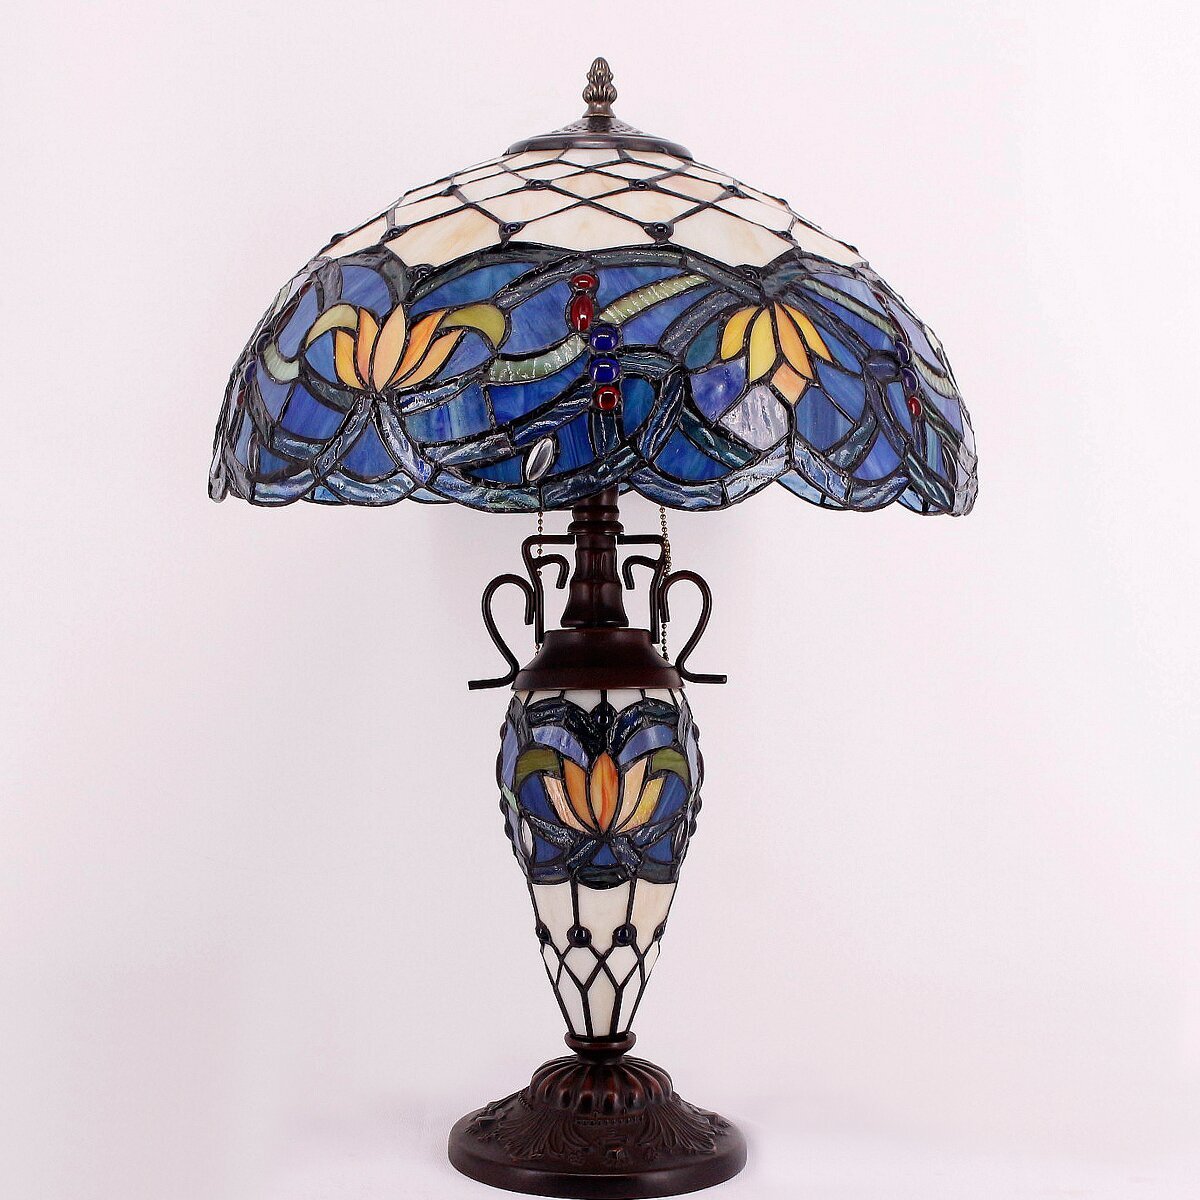 Tiffany Lamp With Nightlight Rustic Large Blue Stained Glass Lotus Table Lamp Desk 24